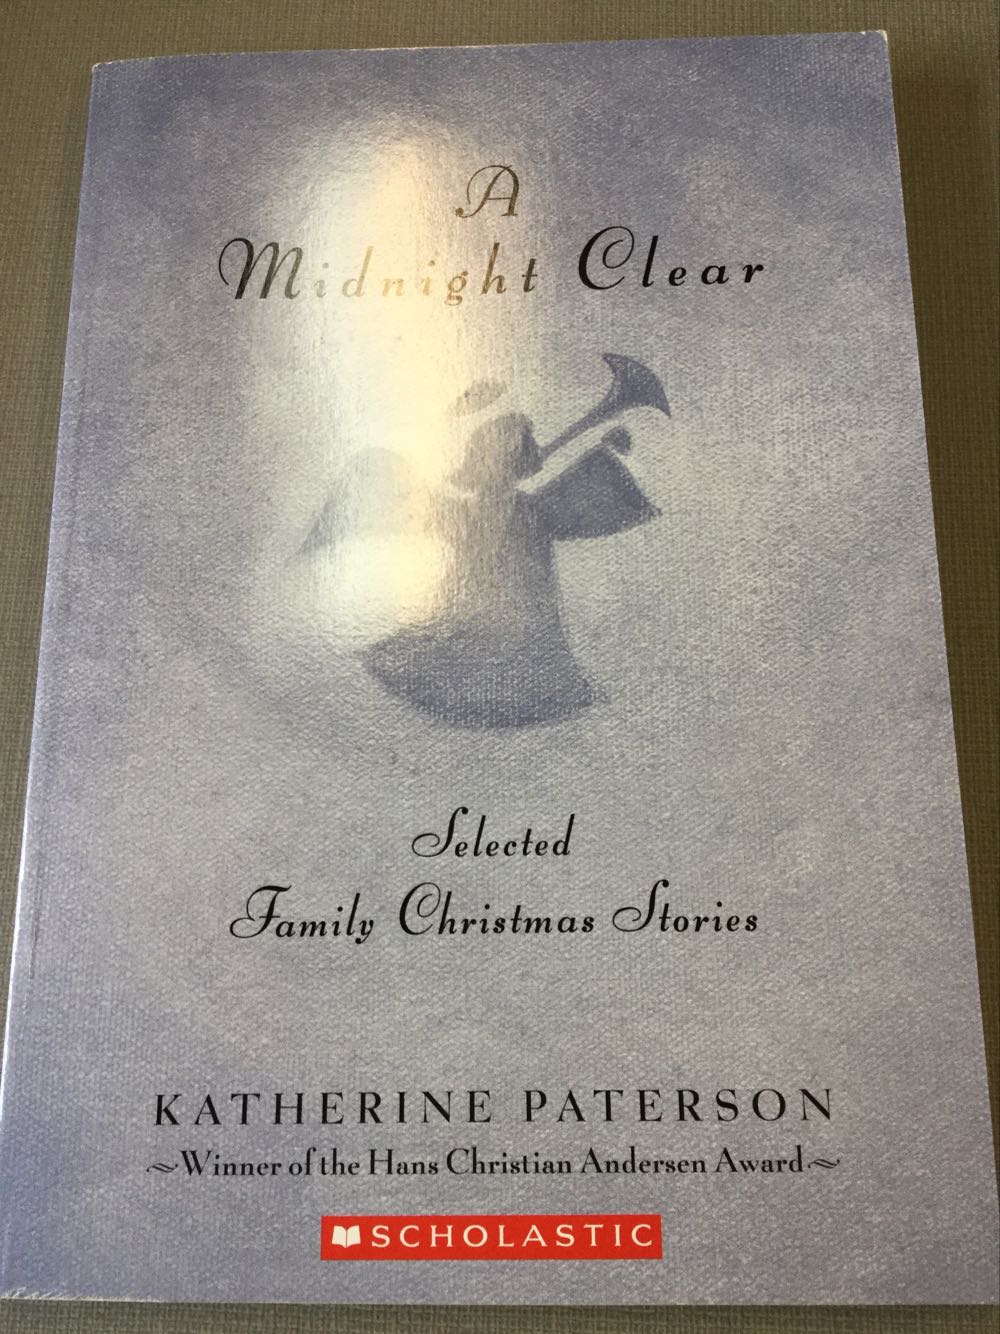 A Midnight Clear - Katherine Paterson (Scholastic Inc. - Paperback) book collectible [Barcode 9780439632492] - Main Image 2